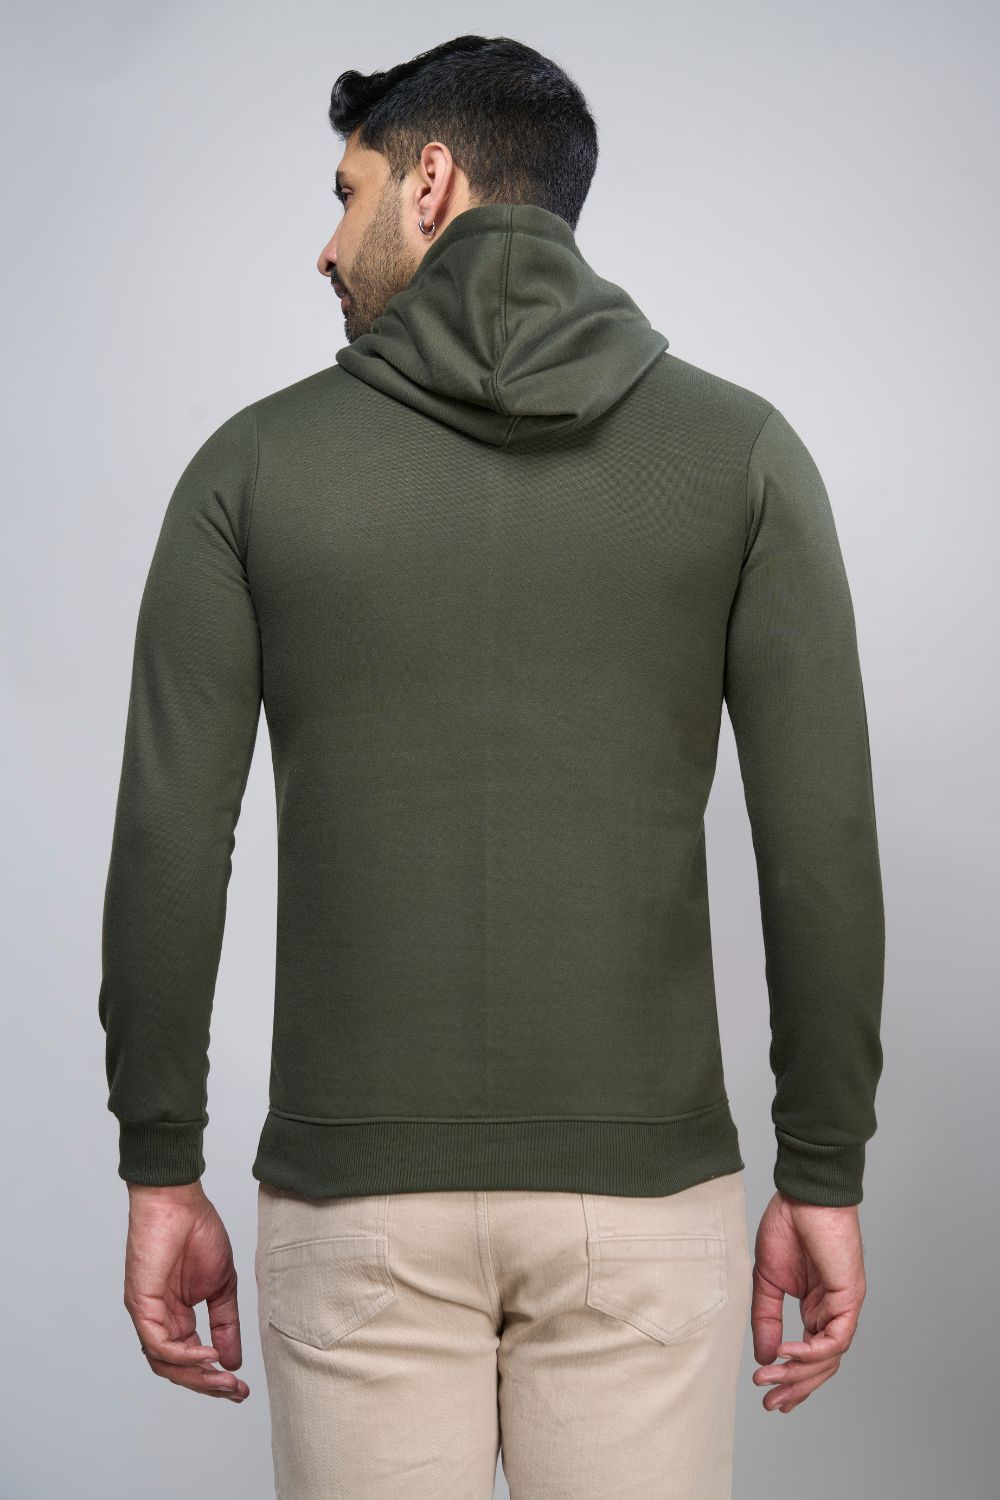 Olive colored, hoodie for men with full sleeves and relaxed fit, back view.